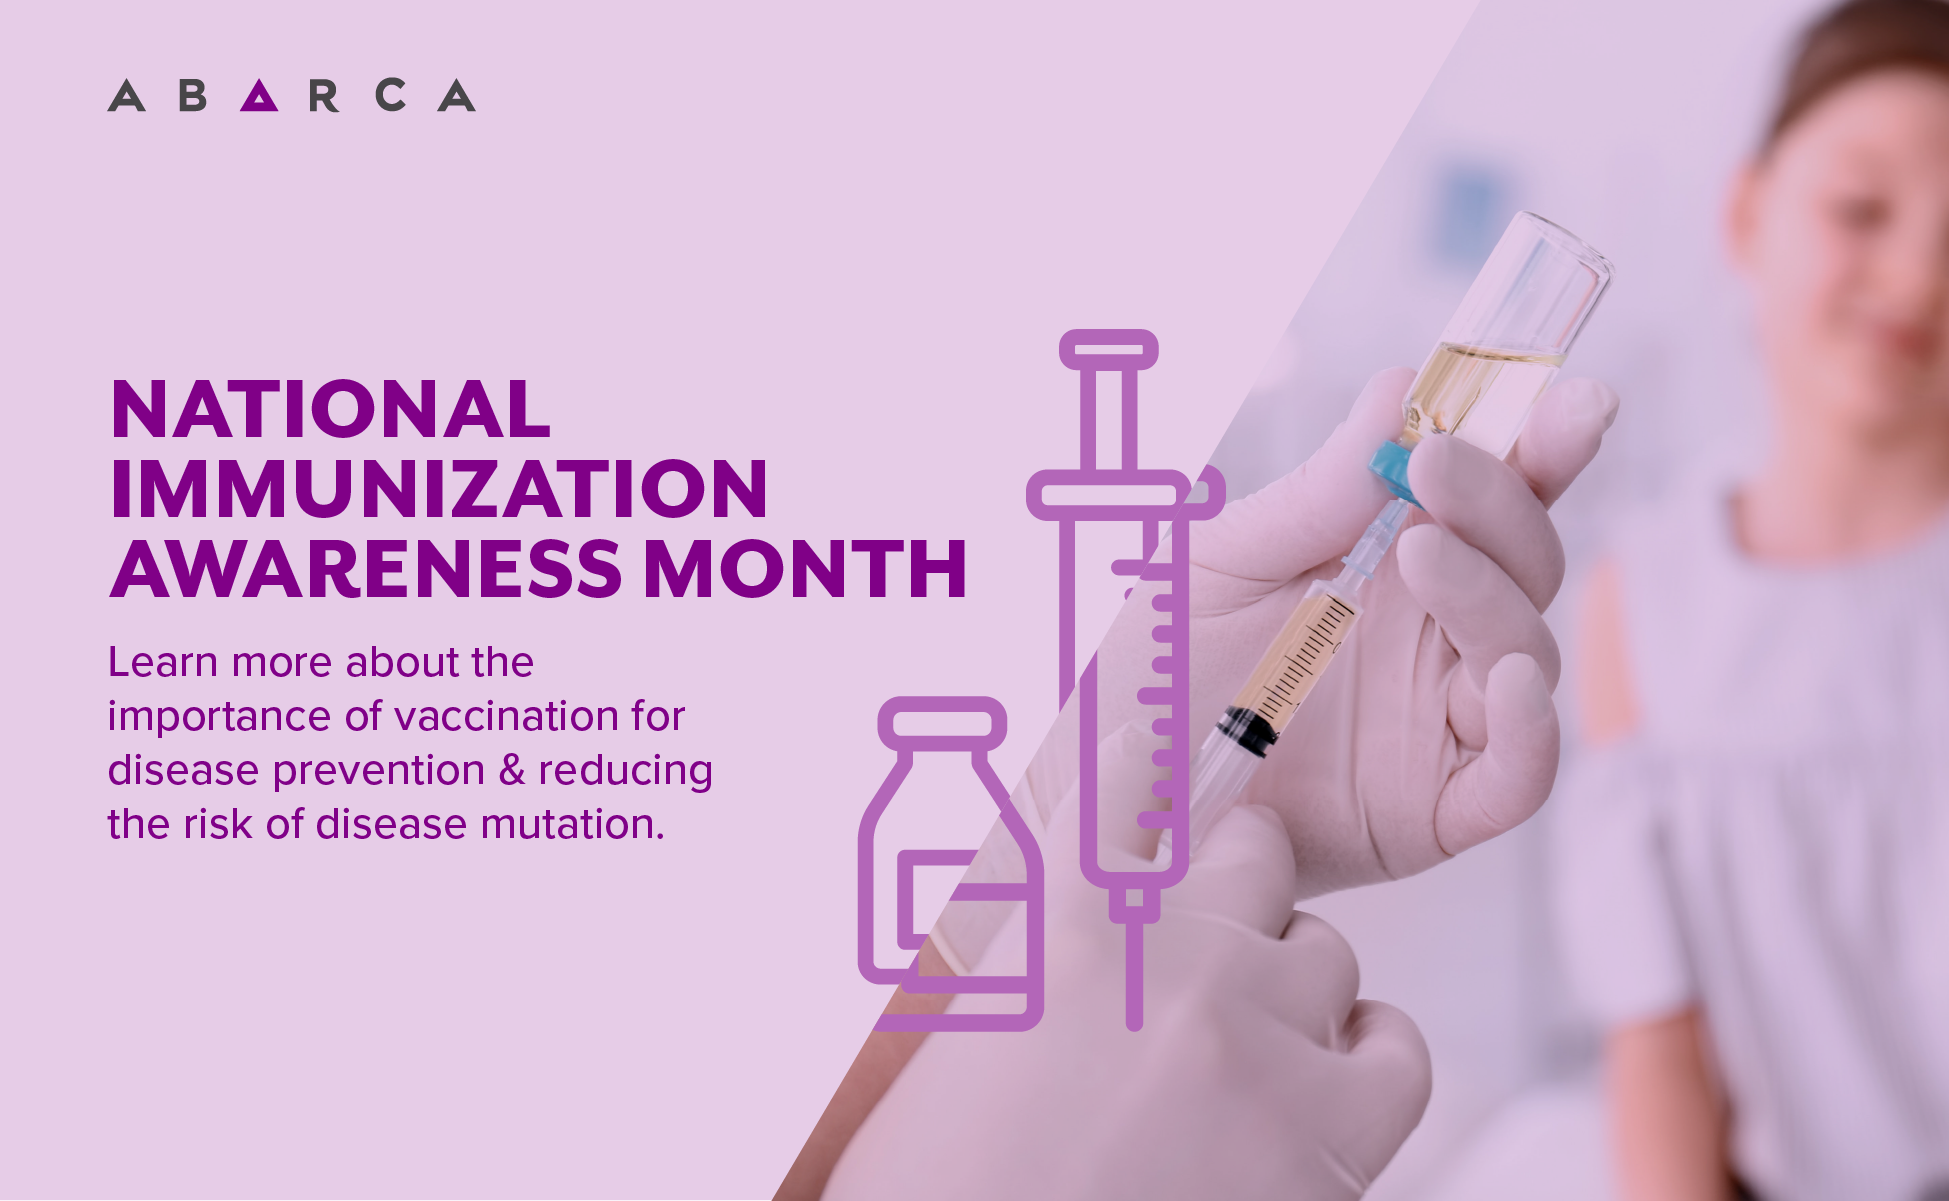 Abarca Health highlights the importance of vaccination for disease prevention.